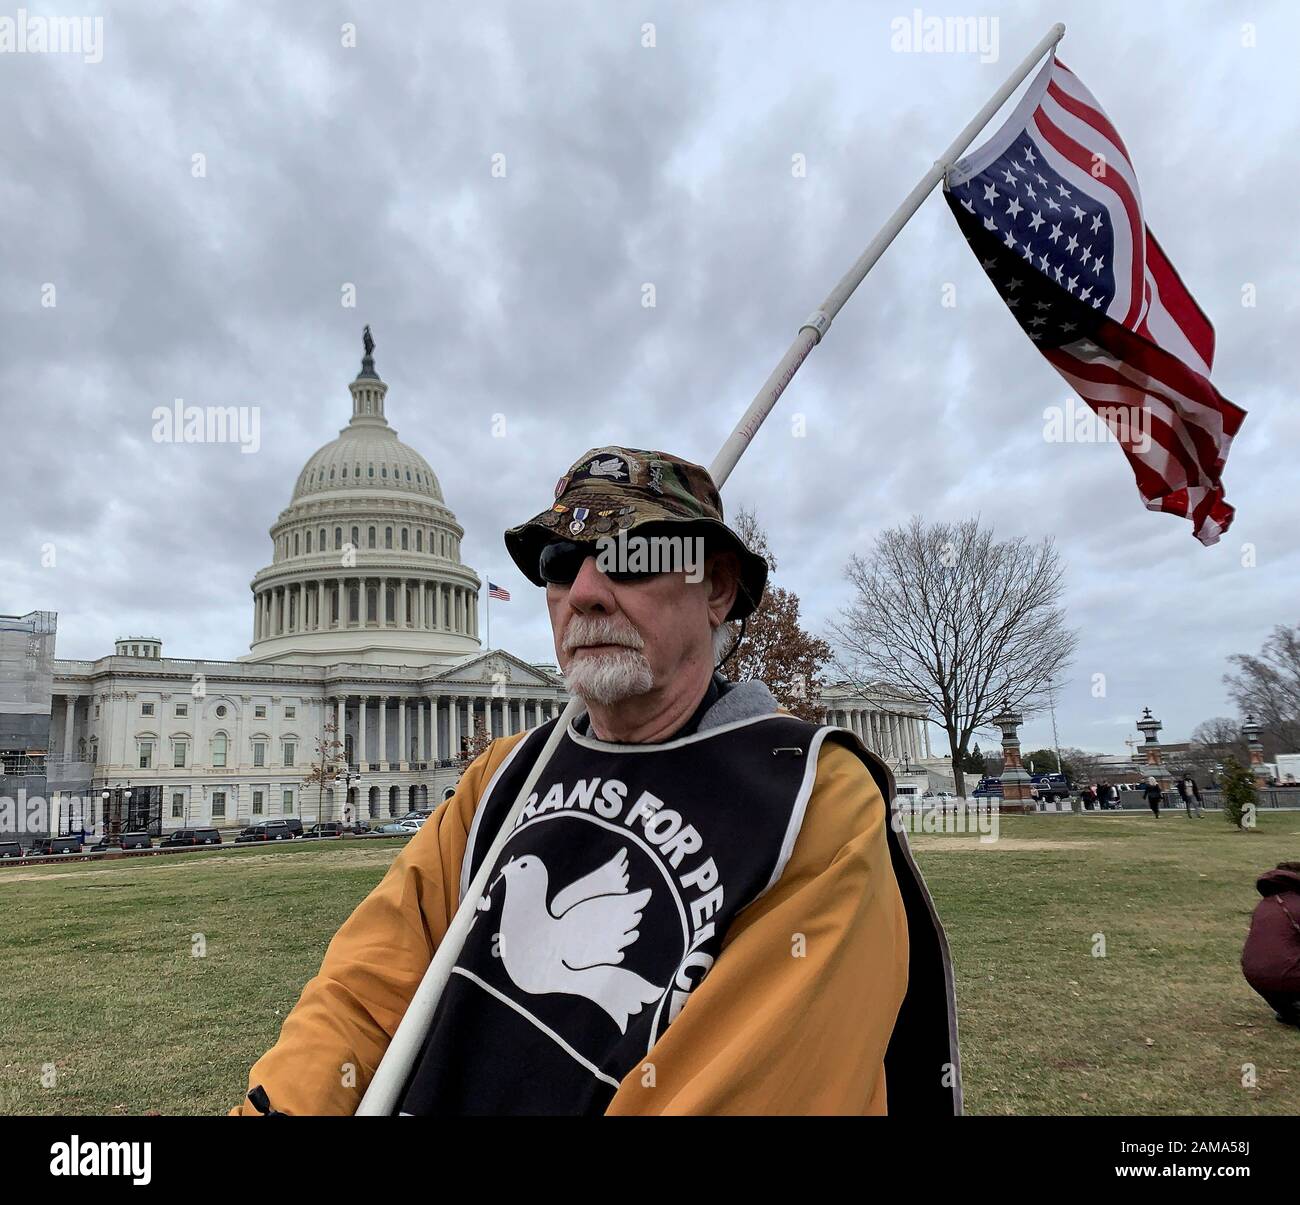 January 10, 2020, Washington, District of Columbia, USA: Decorate Vietname veteran Michael Marceau stands in front of the US Capitol holding an inverted US flag. Flying a flag upside down is ''a signal of dire distress in instances of extreme danger to life or property'' - in his case symbolizing the call that our nation is in distress. (Credit Image: © Sue Dorfman/ZUMA Wire) Stock Photo